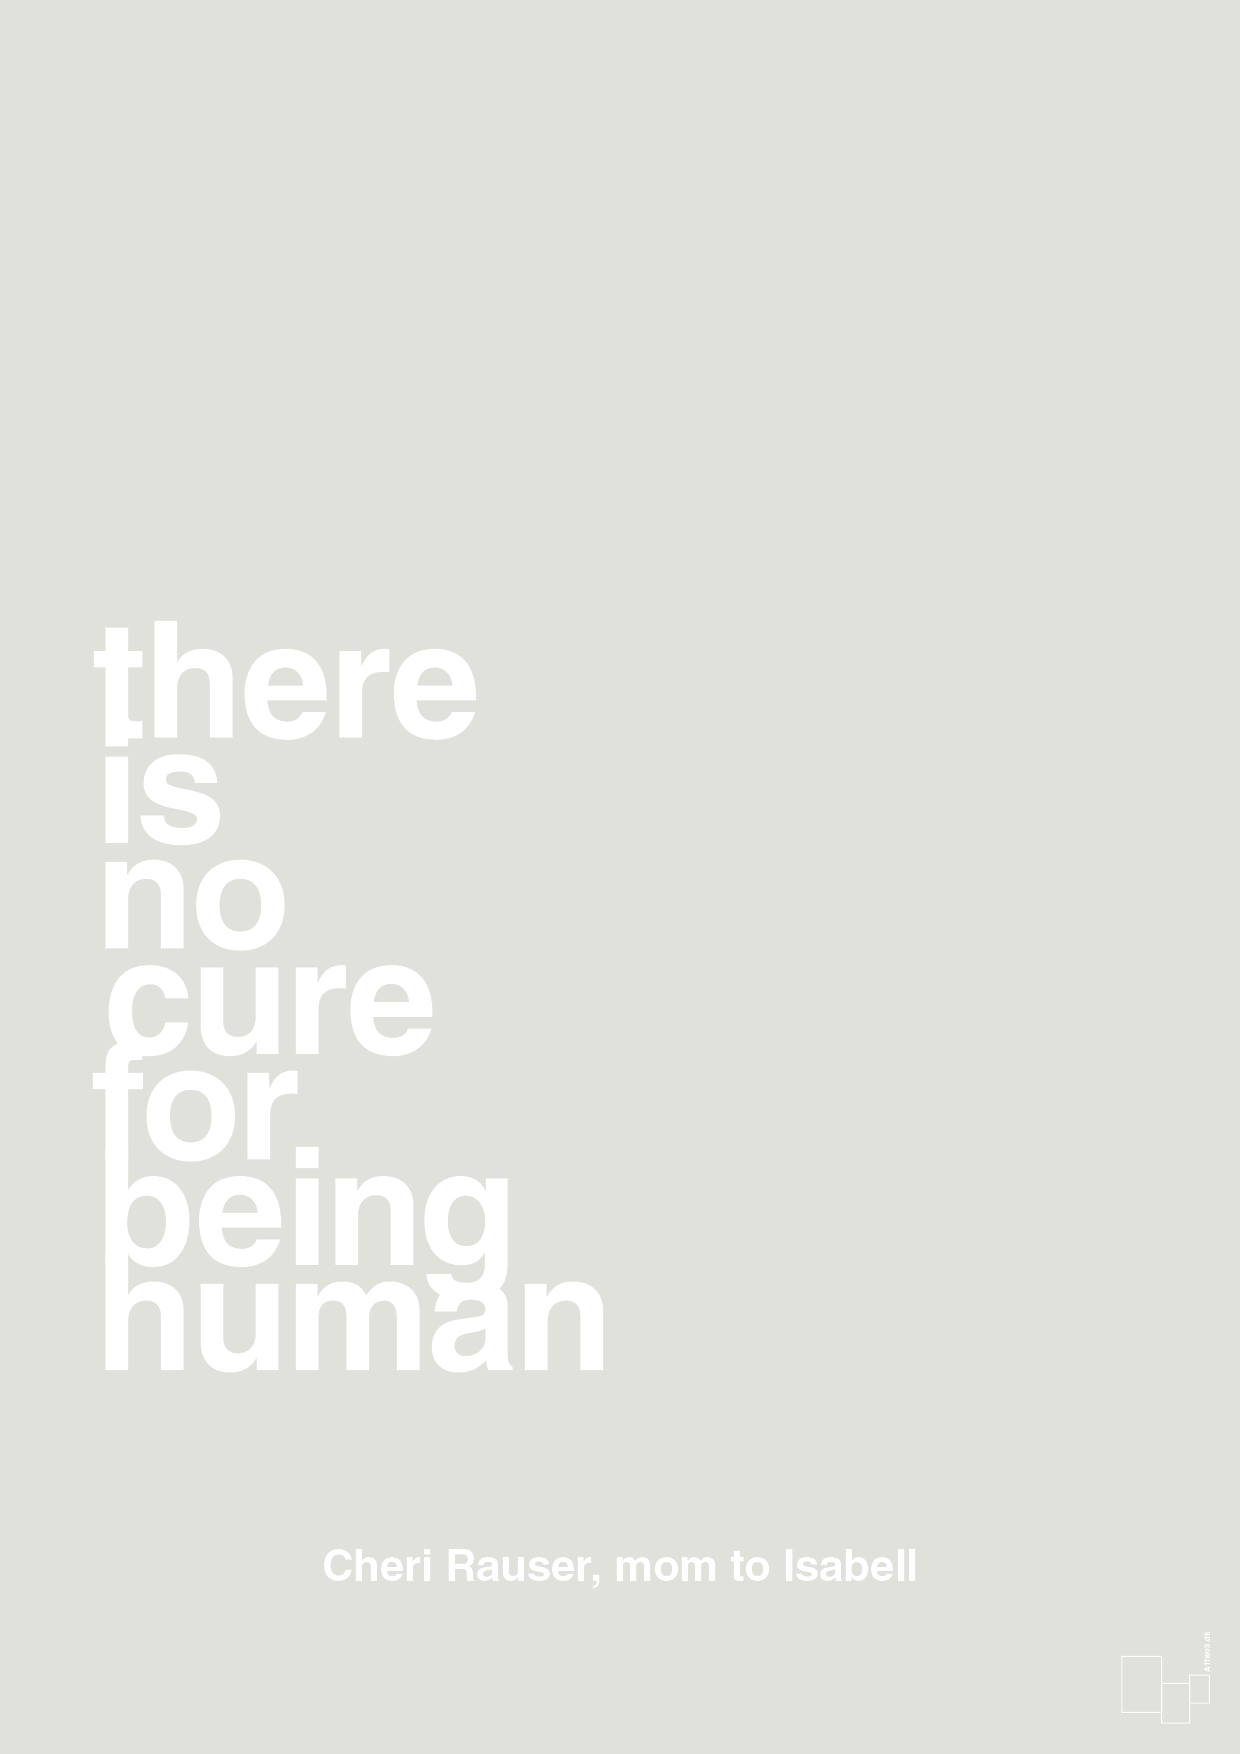 there is no cure for being human - Plakat med Samfund i Painters White